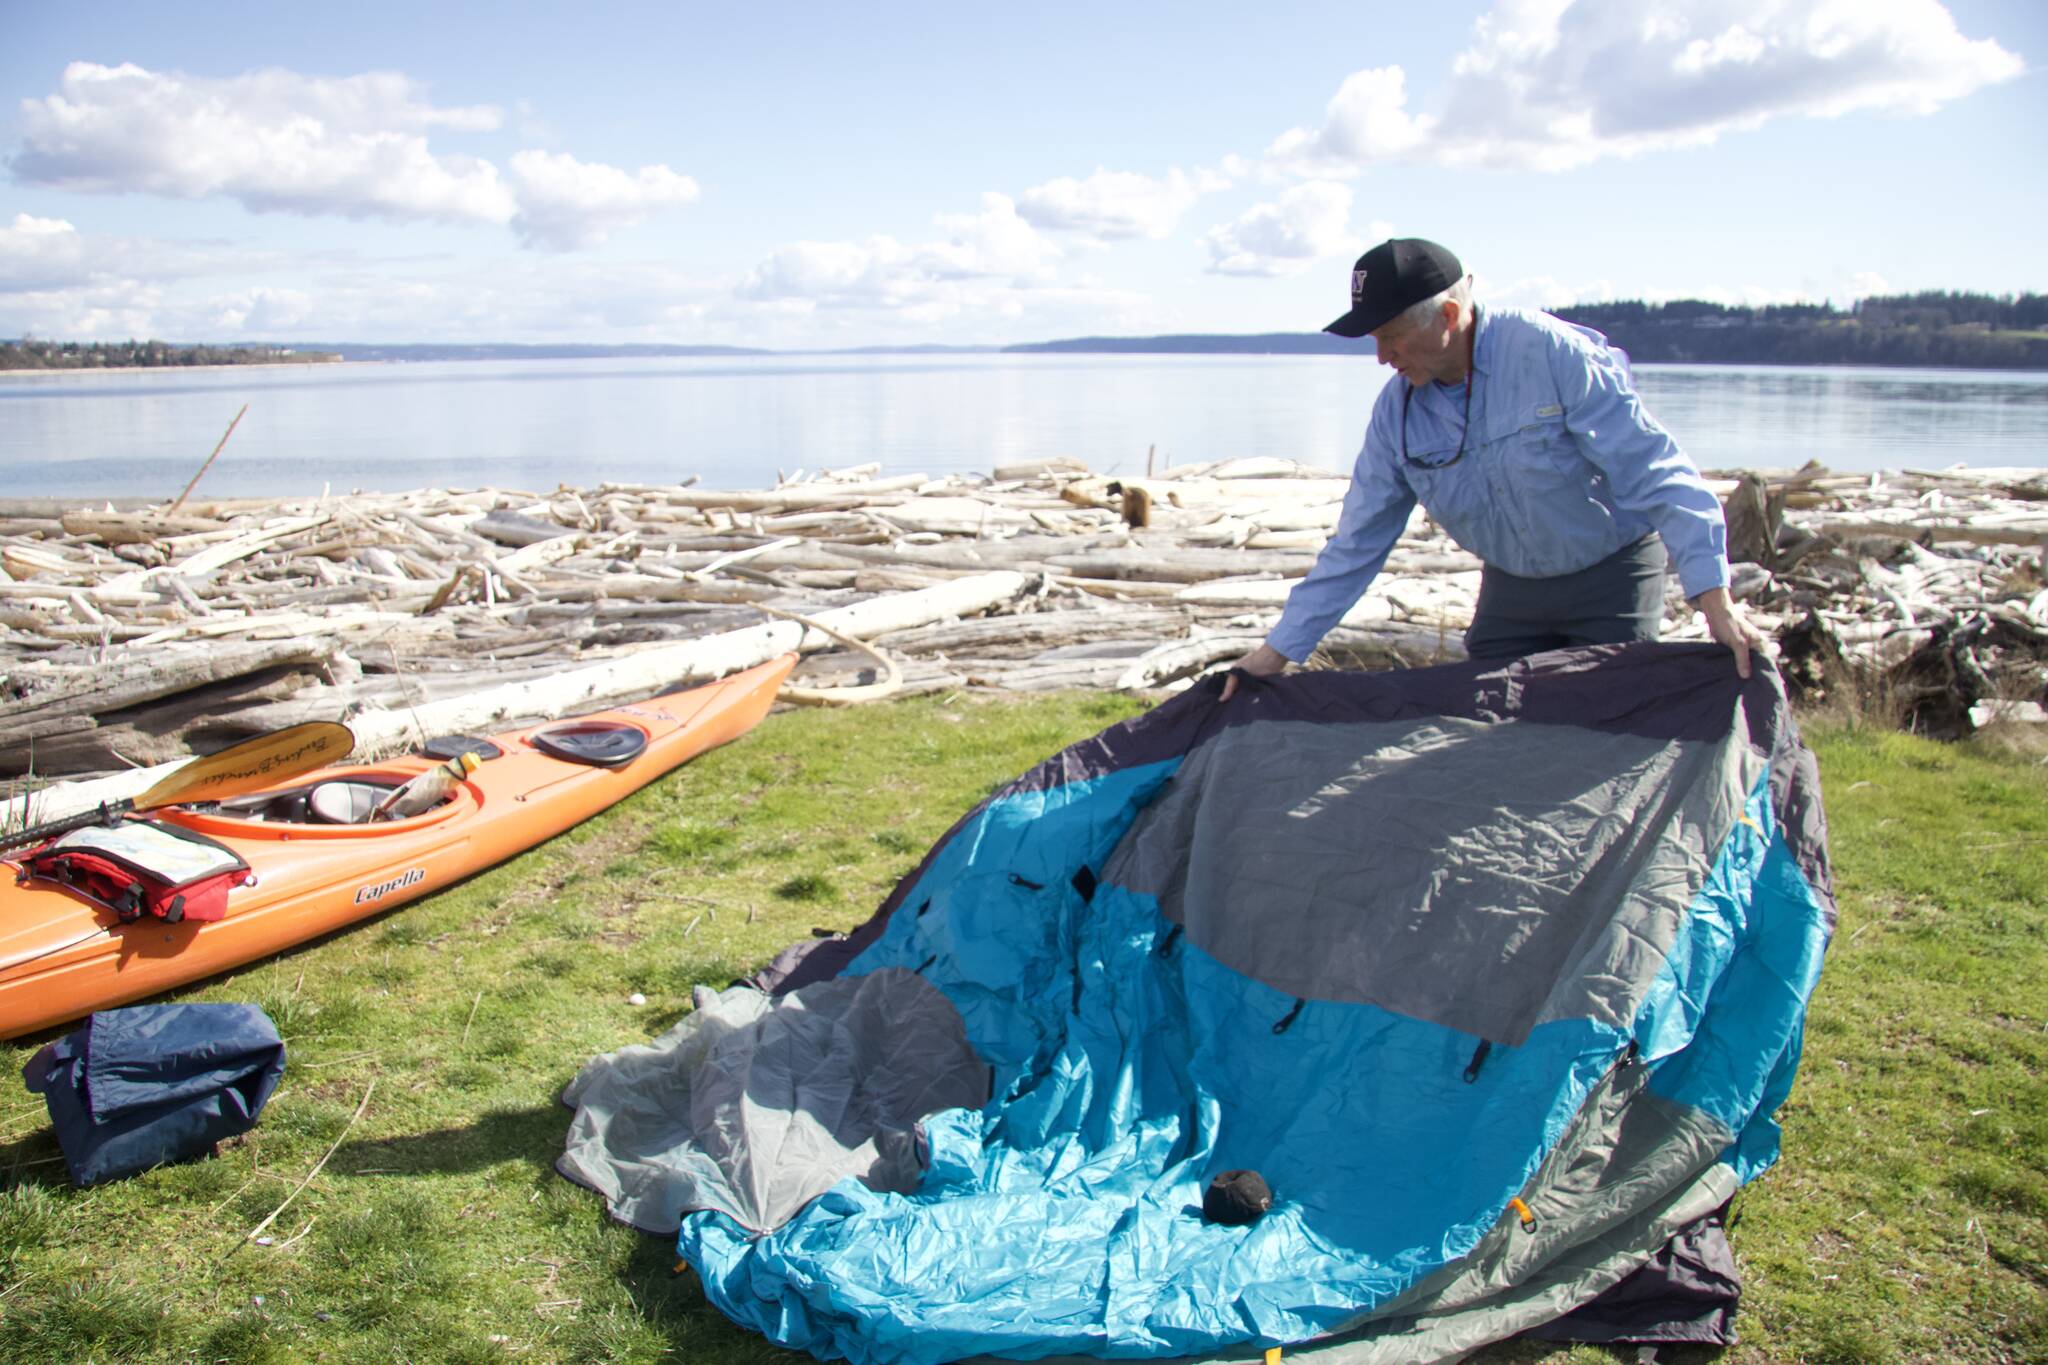 Photo by Rachel Rosen/Whidbey News-Times
Bill Walker demonstrates setting up camp at Windjammer Park’s water camping site.